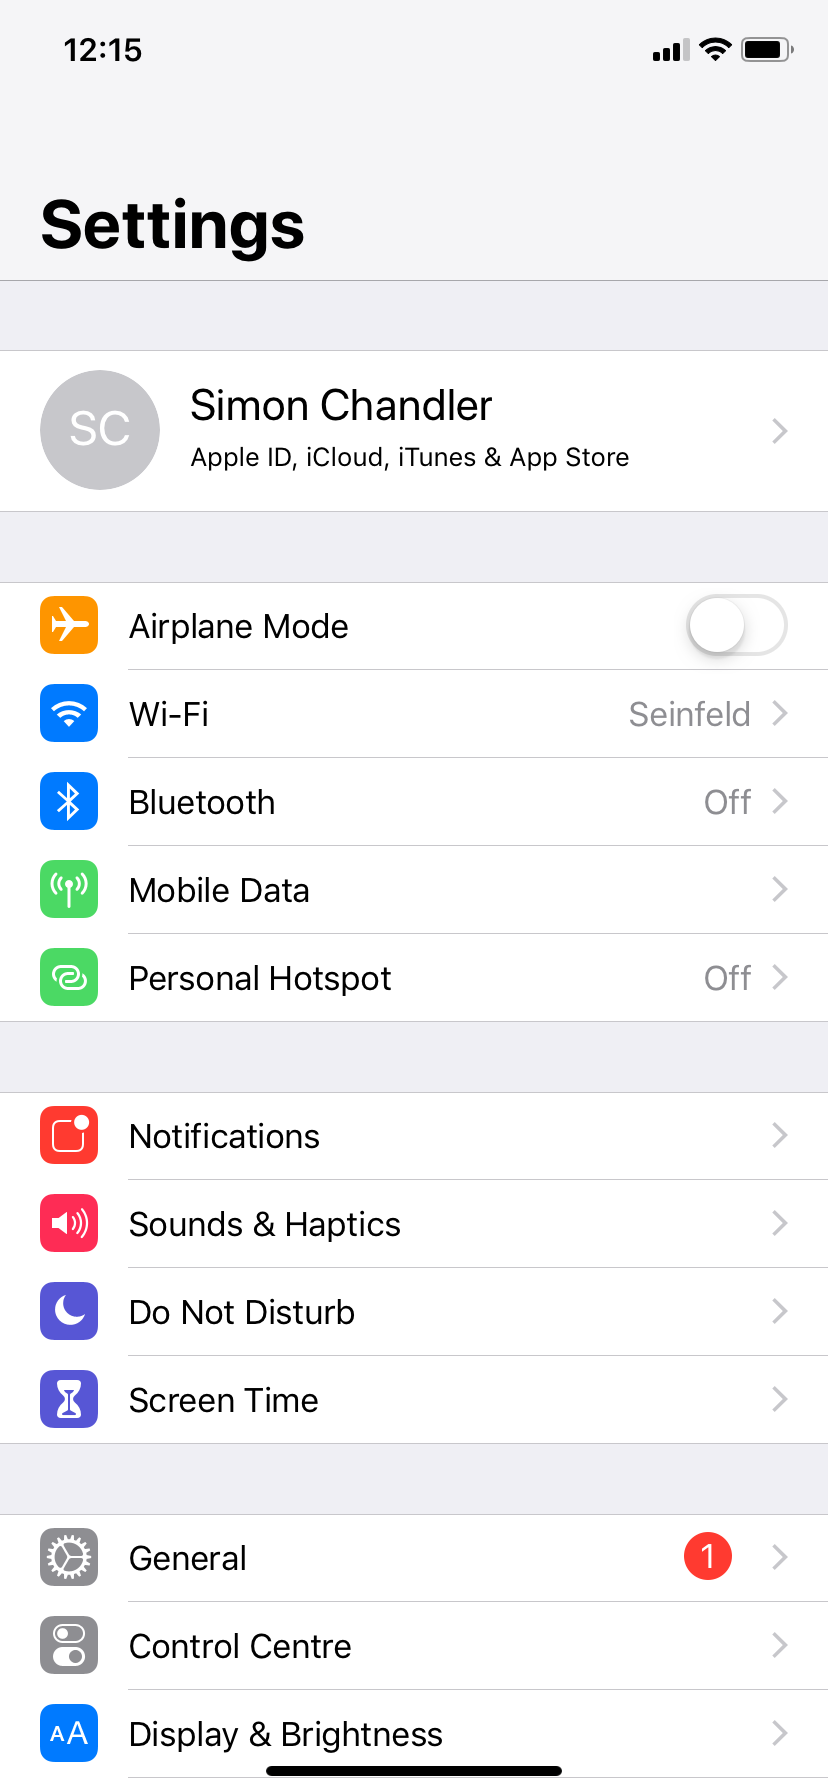 Resetting network settings on iPhone